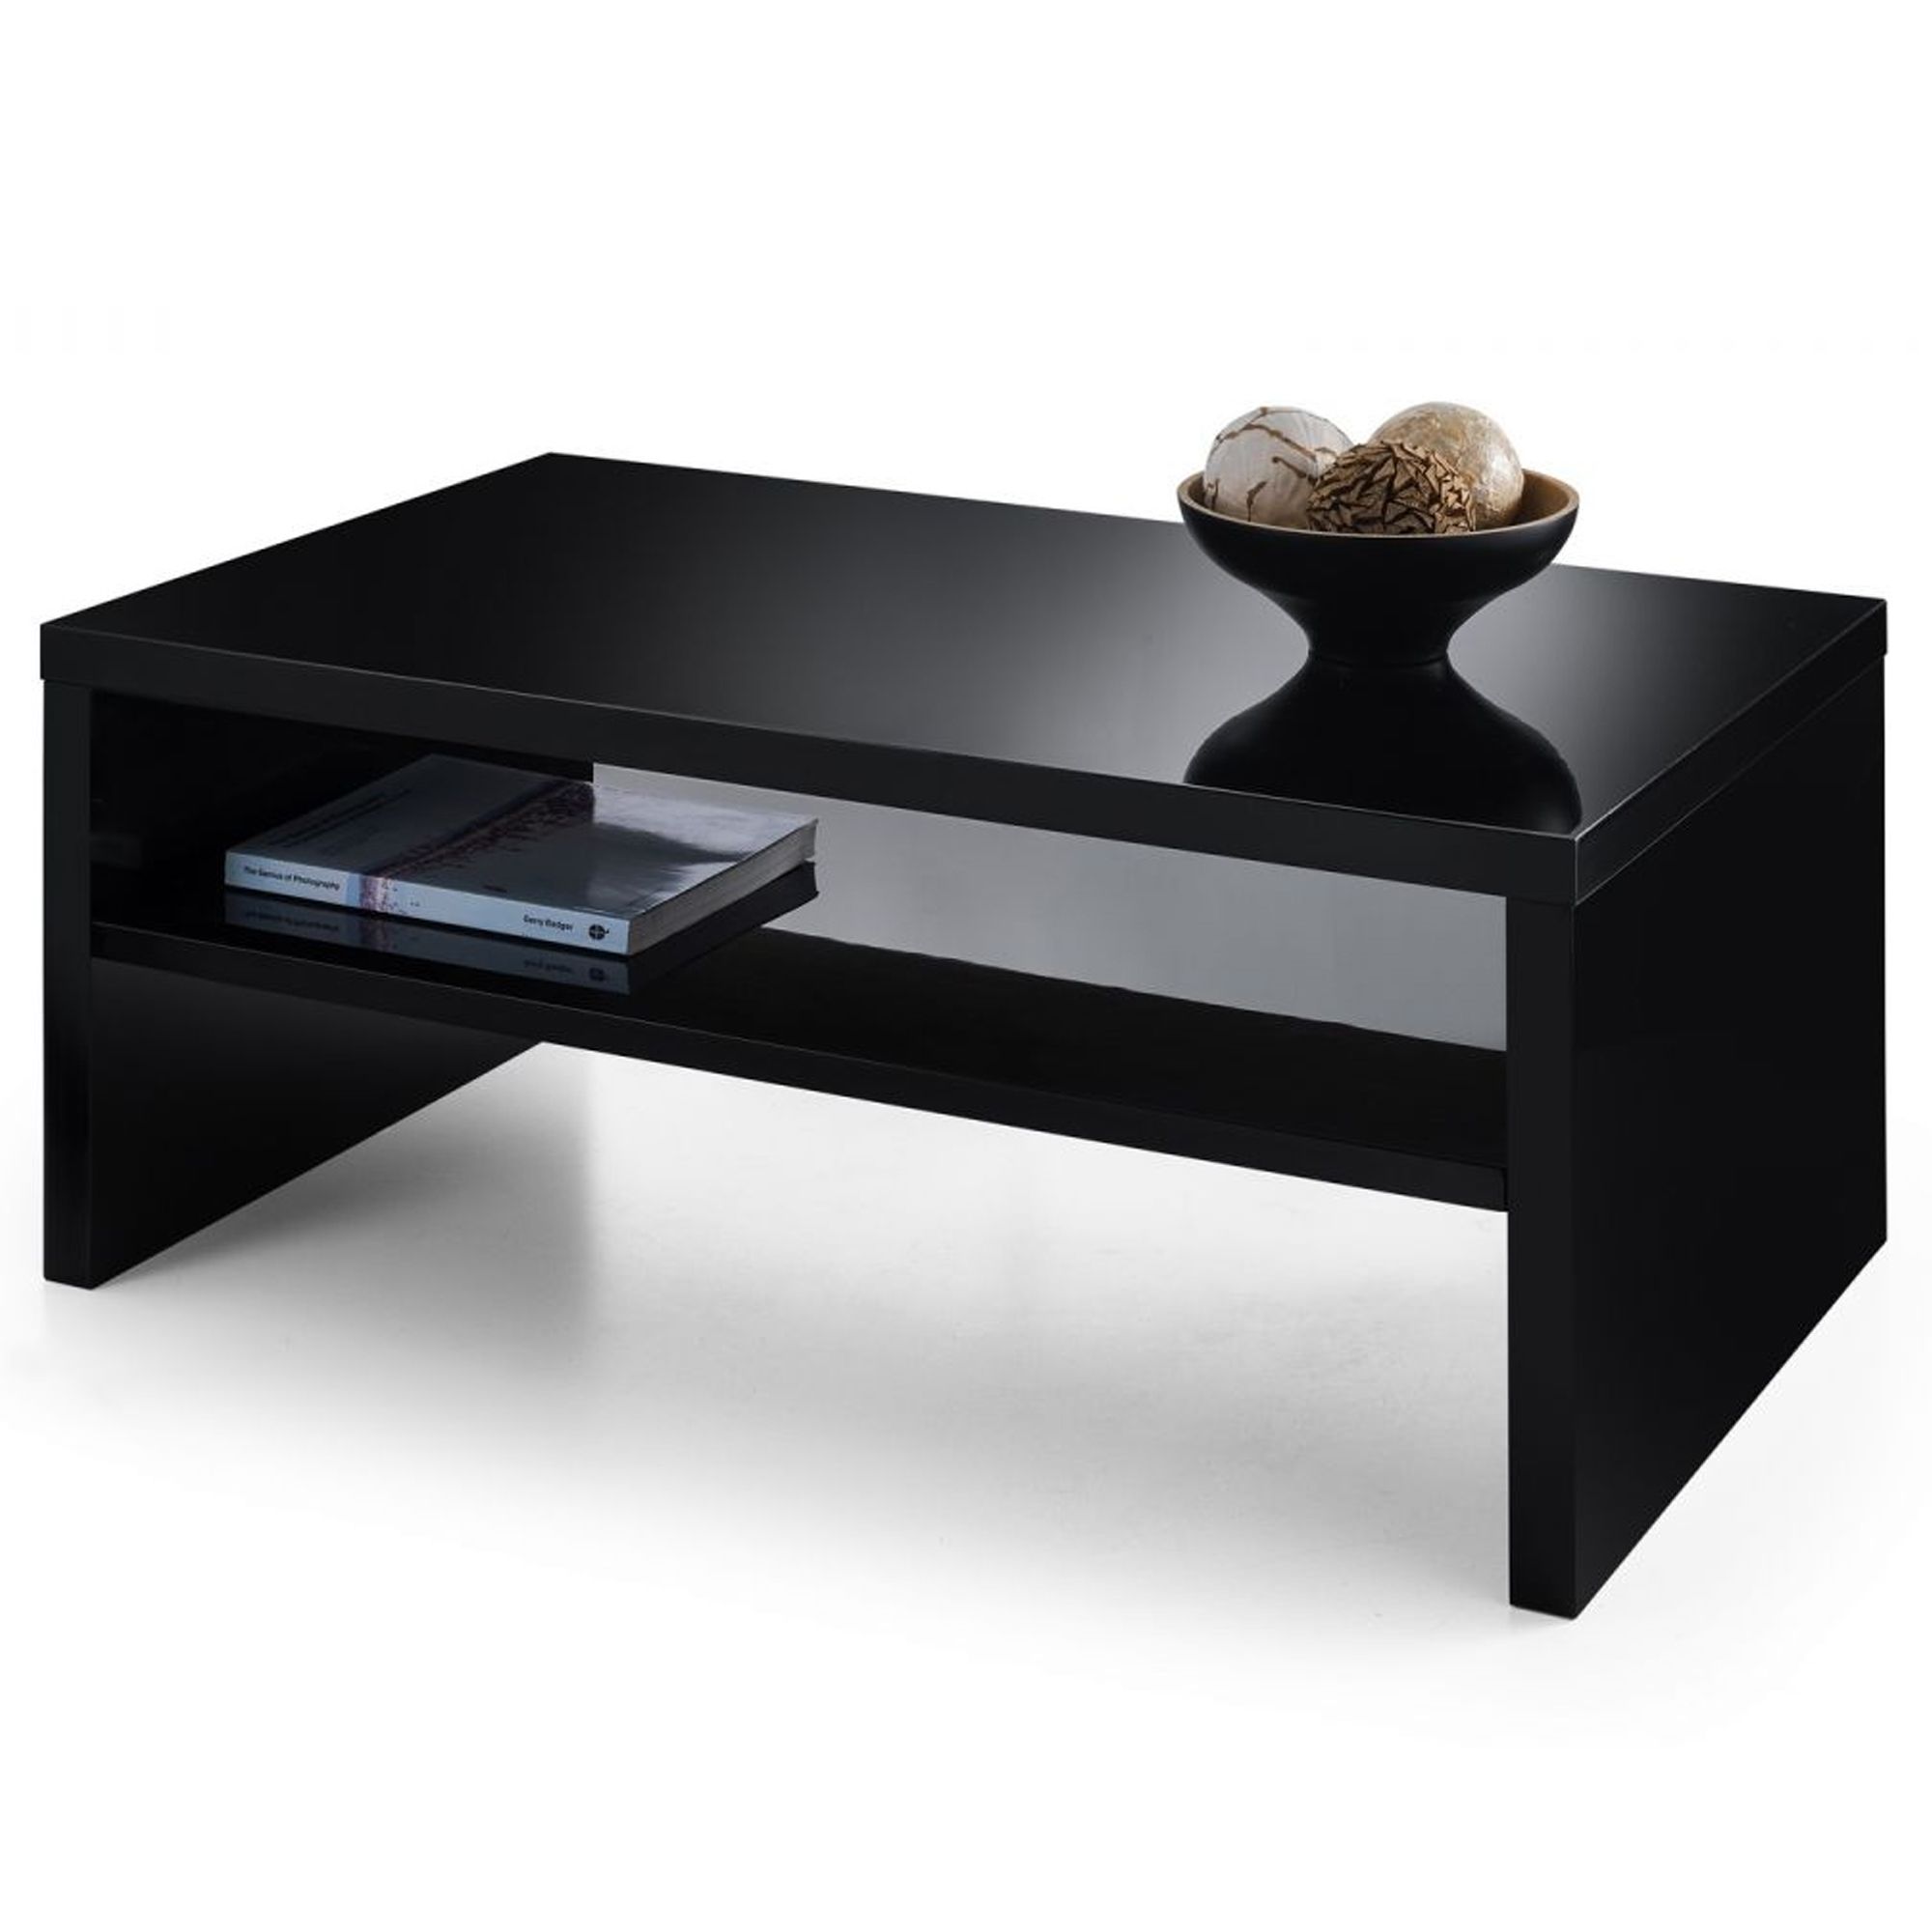 Black Metro High Gloss Coffee Table | Contemporary Lounge Furniture Within High Gloss Black Coffee Tables (View 2 of 15)